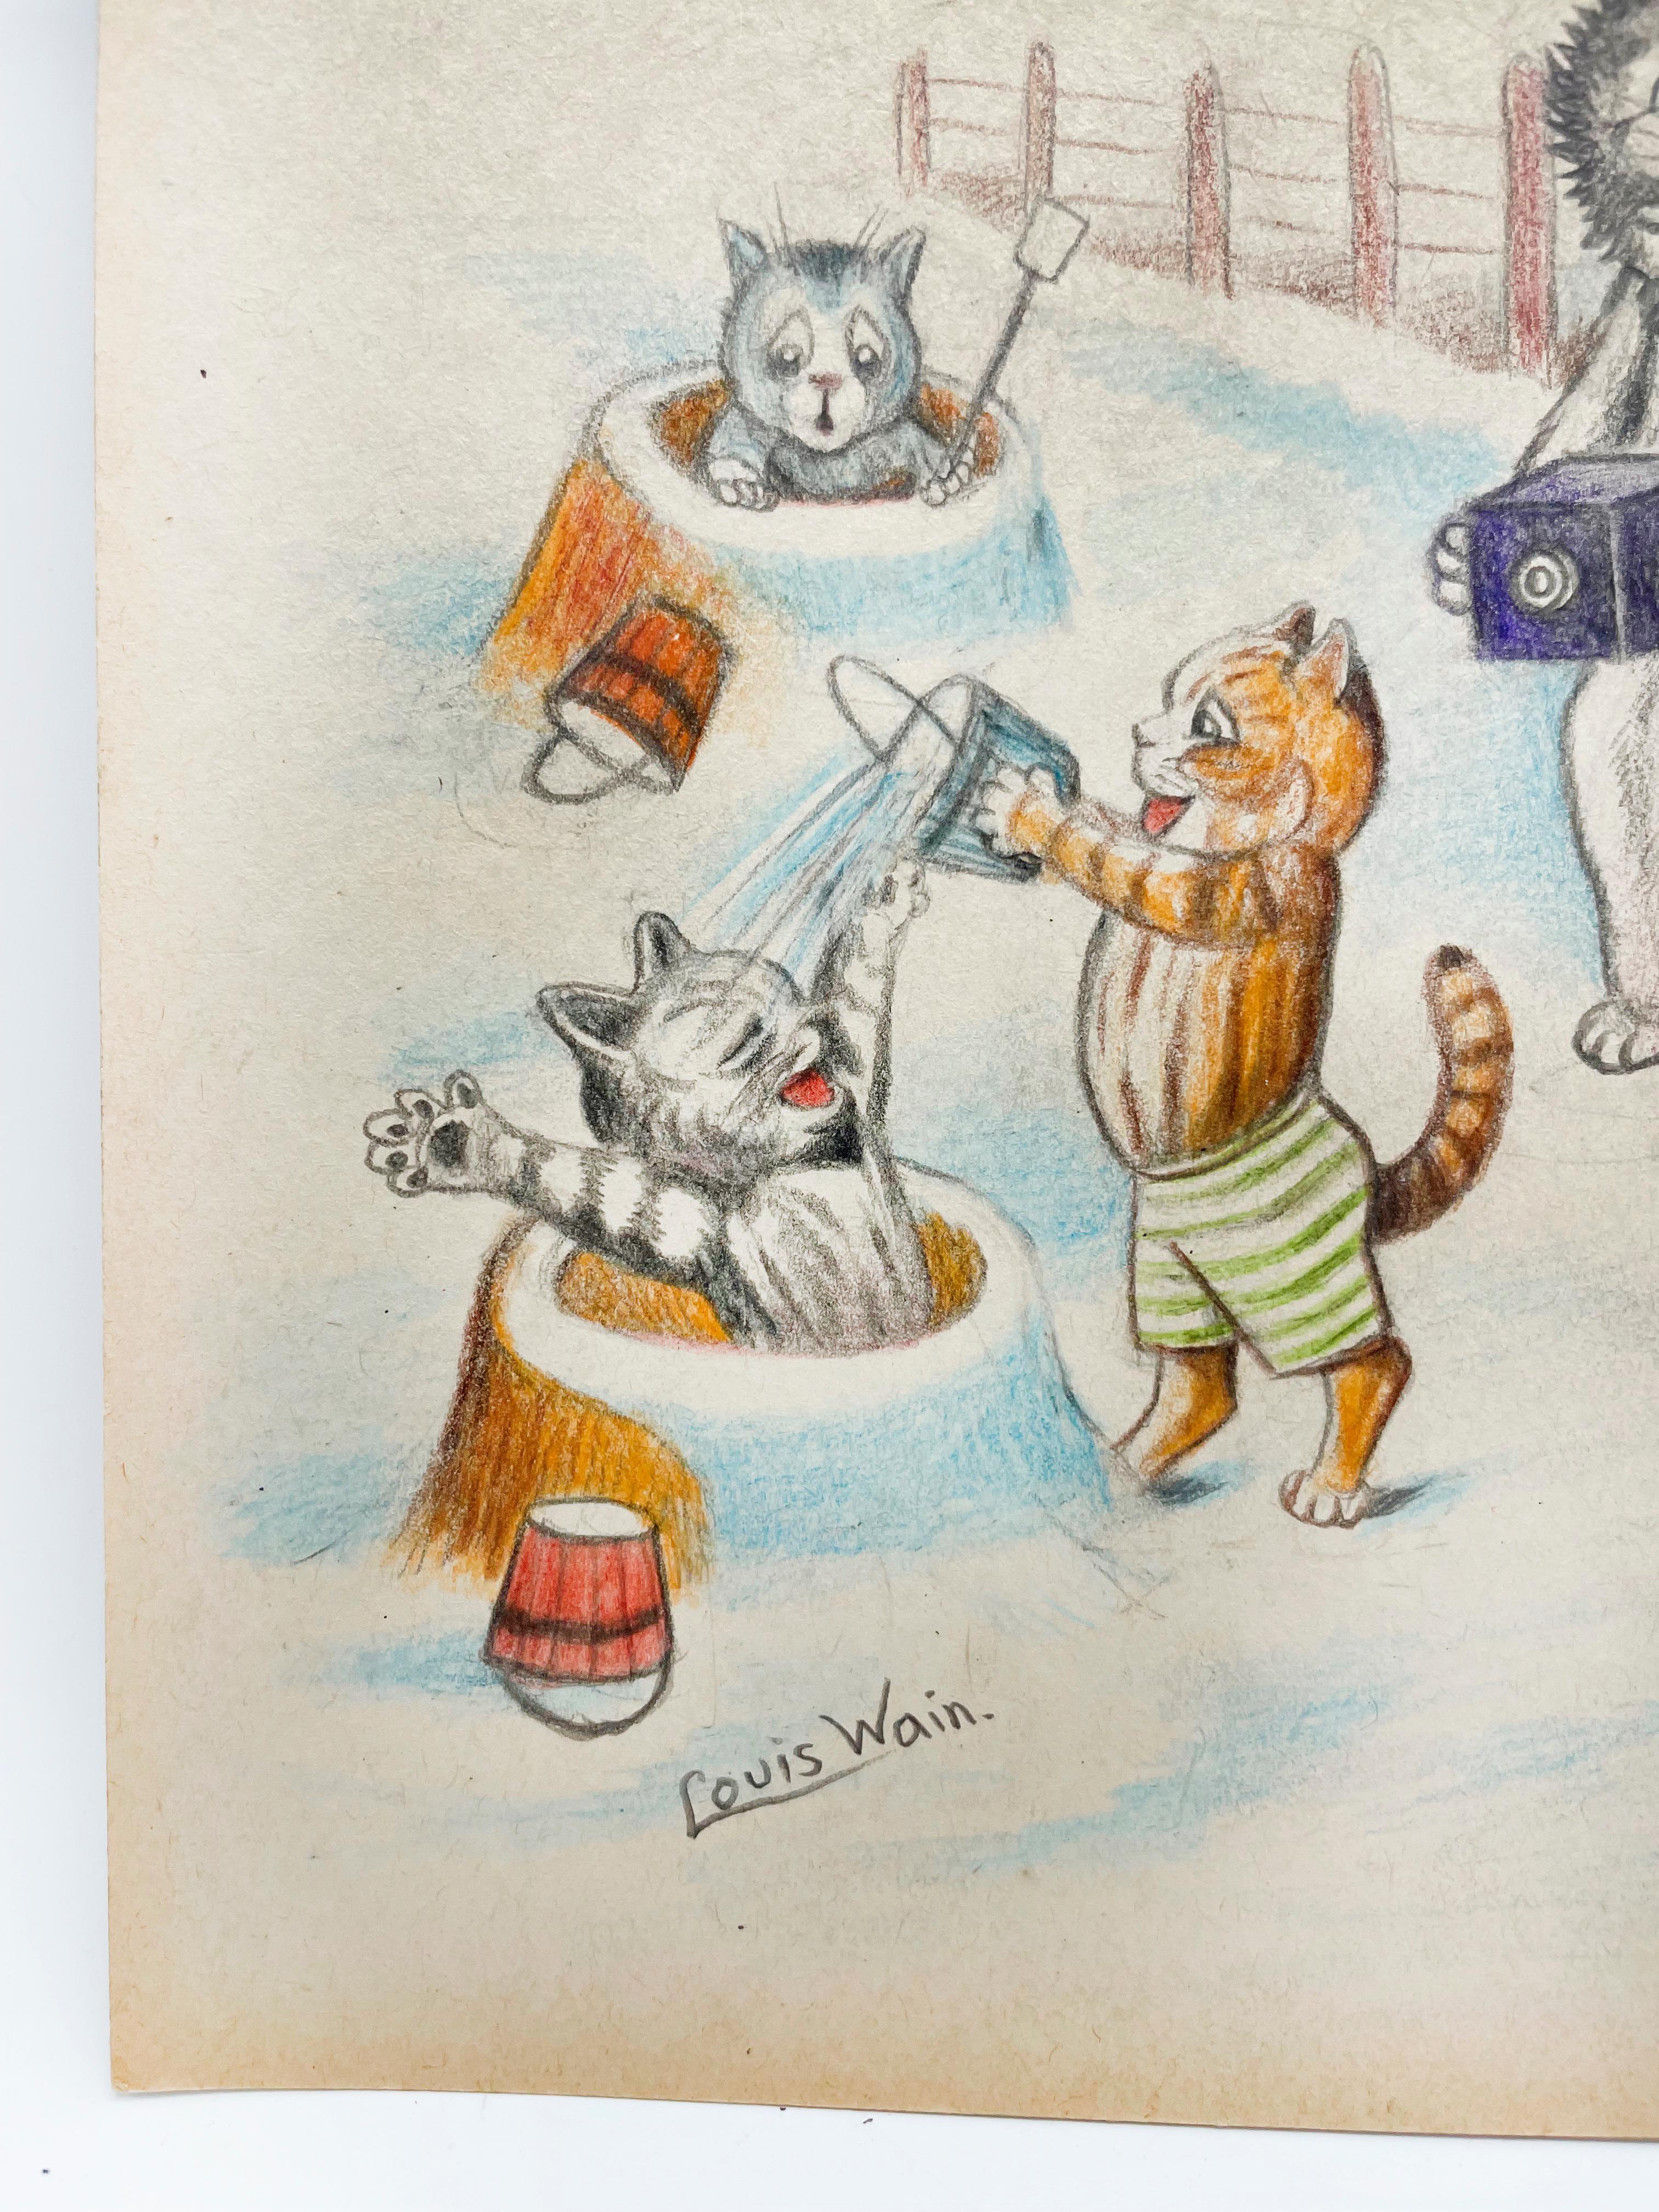 For a brief period at the end of the nineteenth century, Louis Wain was arguably England’s most reproduced artist. Not England’s most lauded artist, certainly—there are no works by him in the National Gallery, for example—but between 1895 and 1905